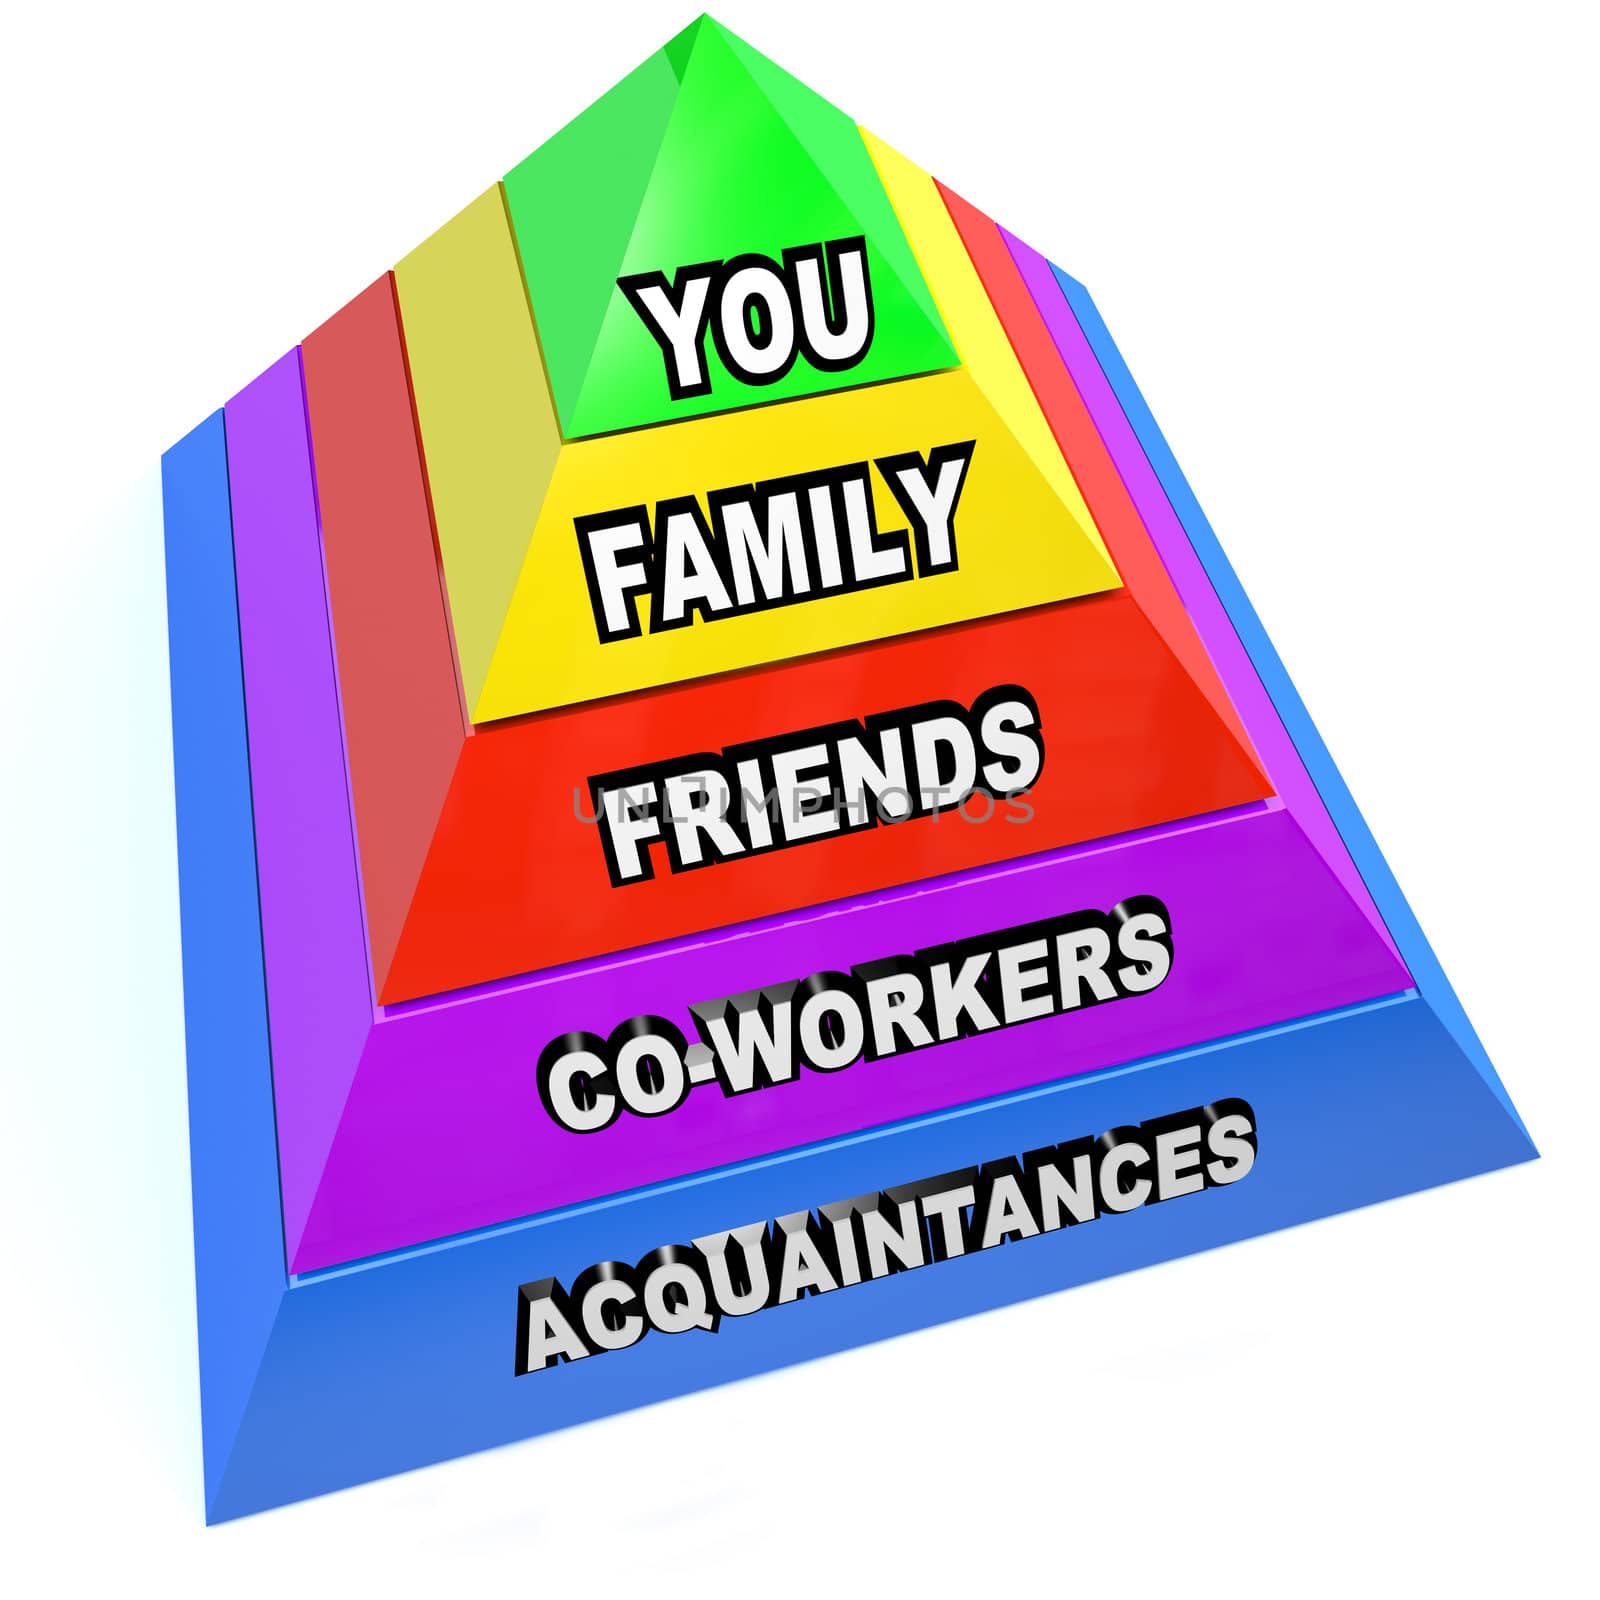 Pyramid of Personal Communication Network Relationships by iQoncept